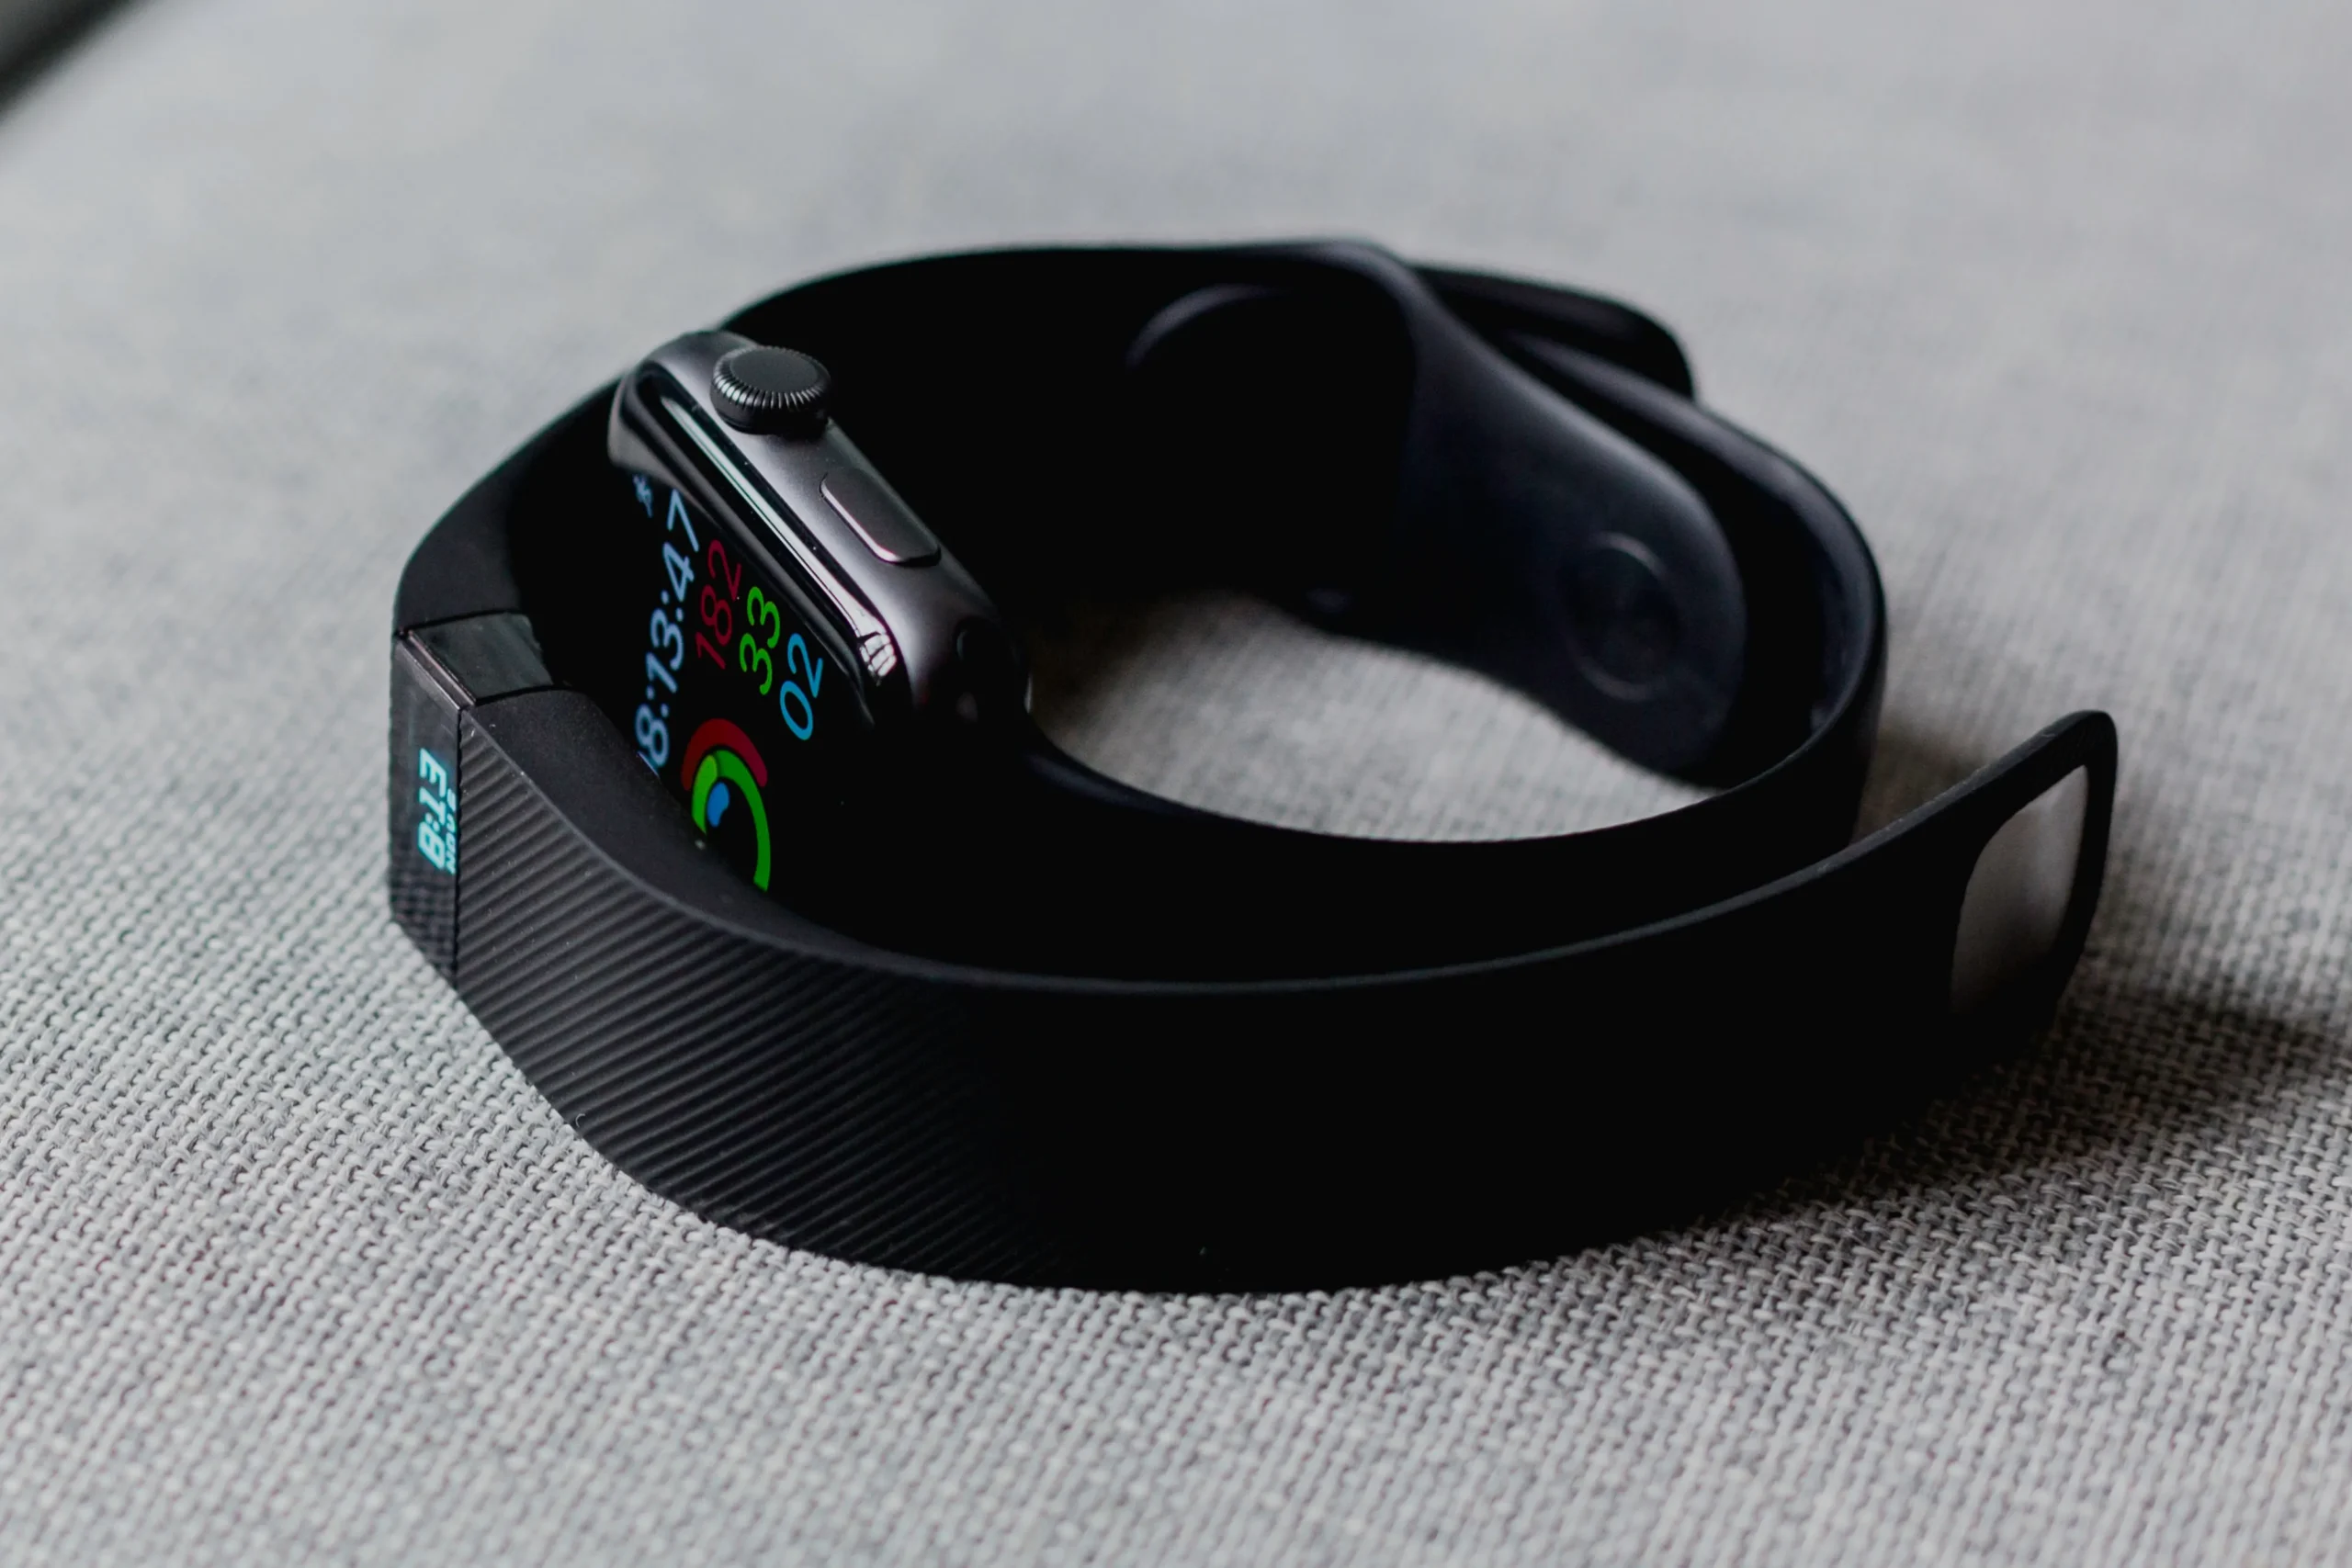 How to Fix a Fitbit Luxe That's Not Tracking Sleep